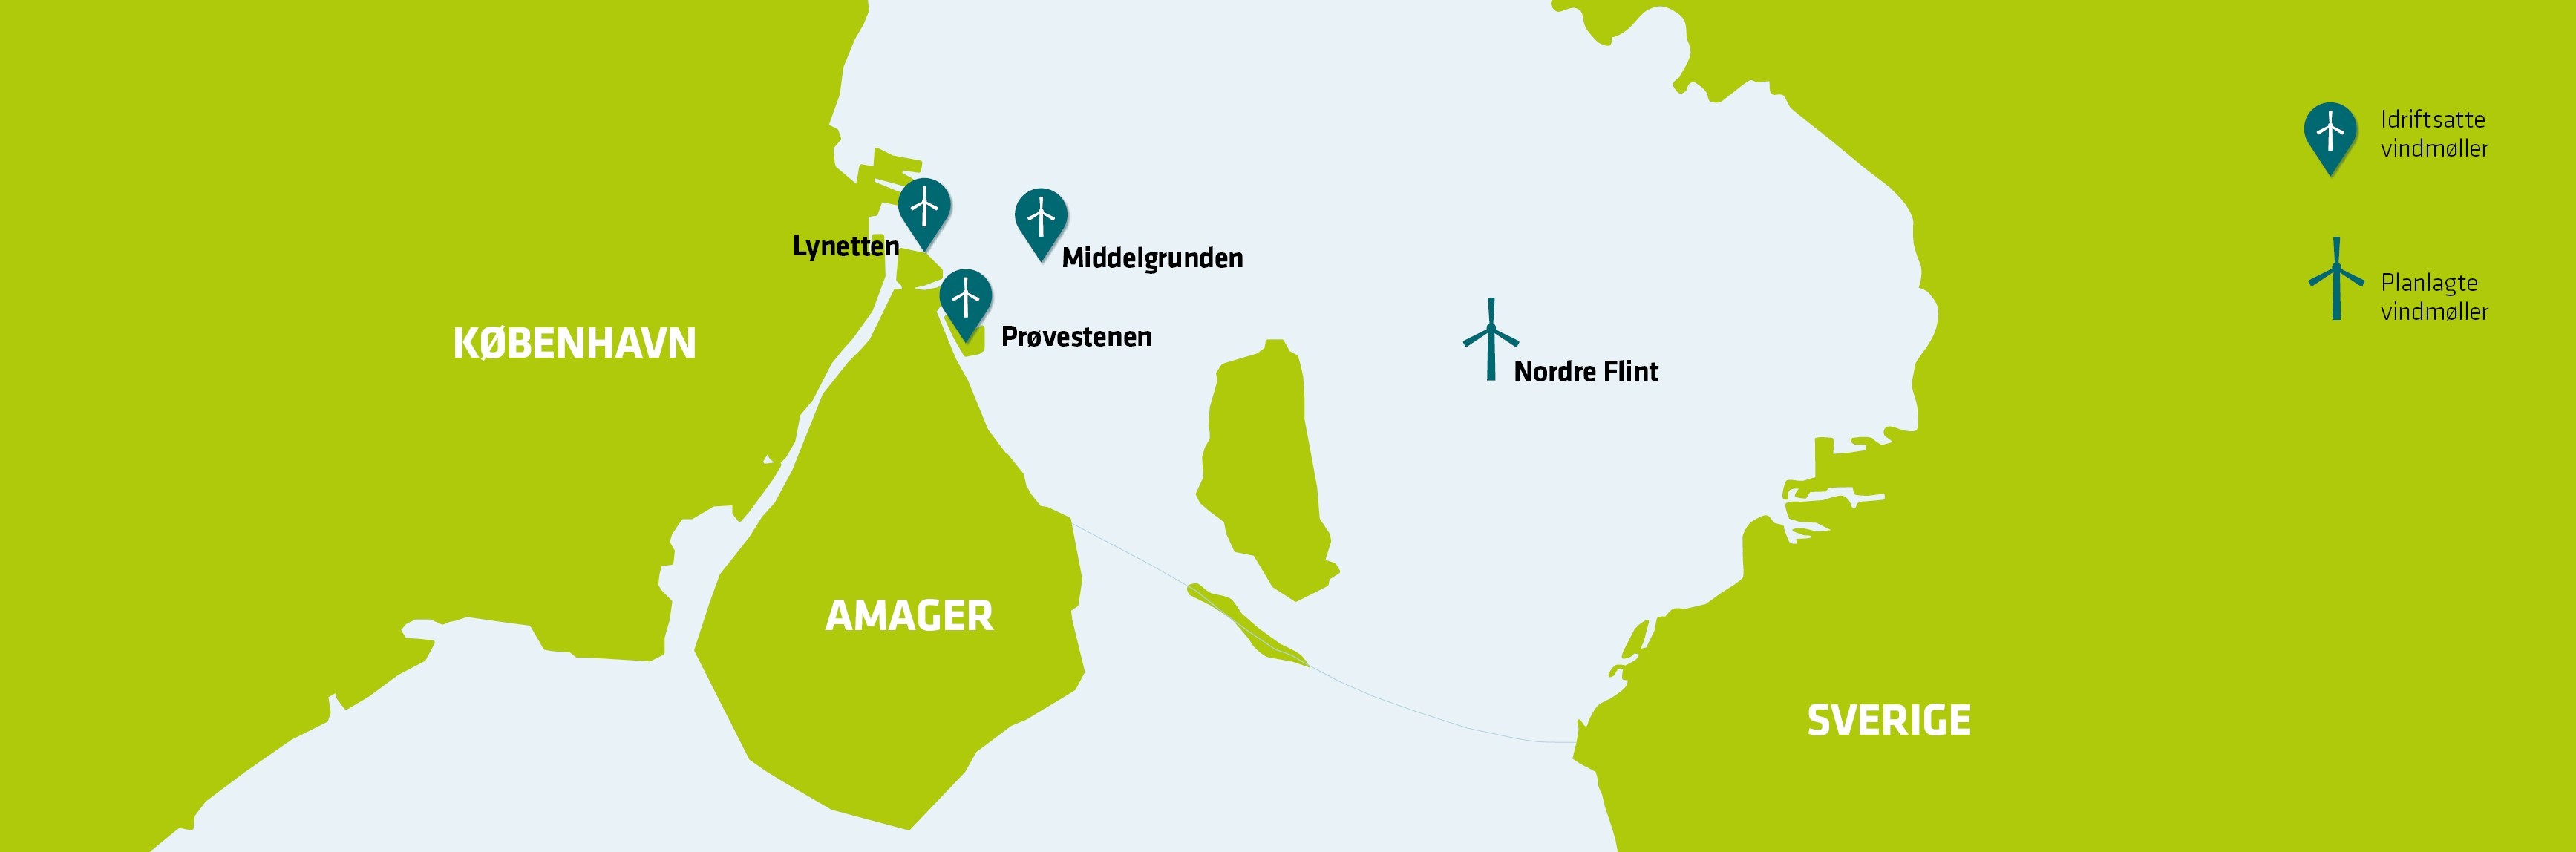 An image showing locations of HOFOR Nordre Flint nearshore wind farm